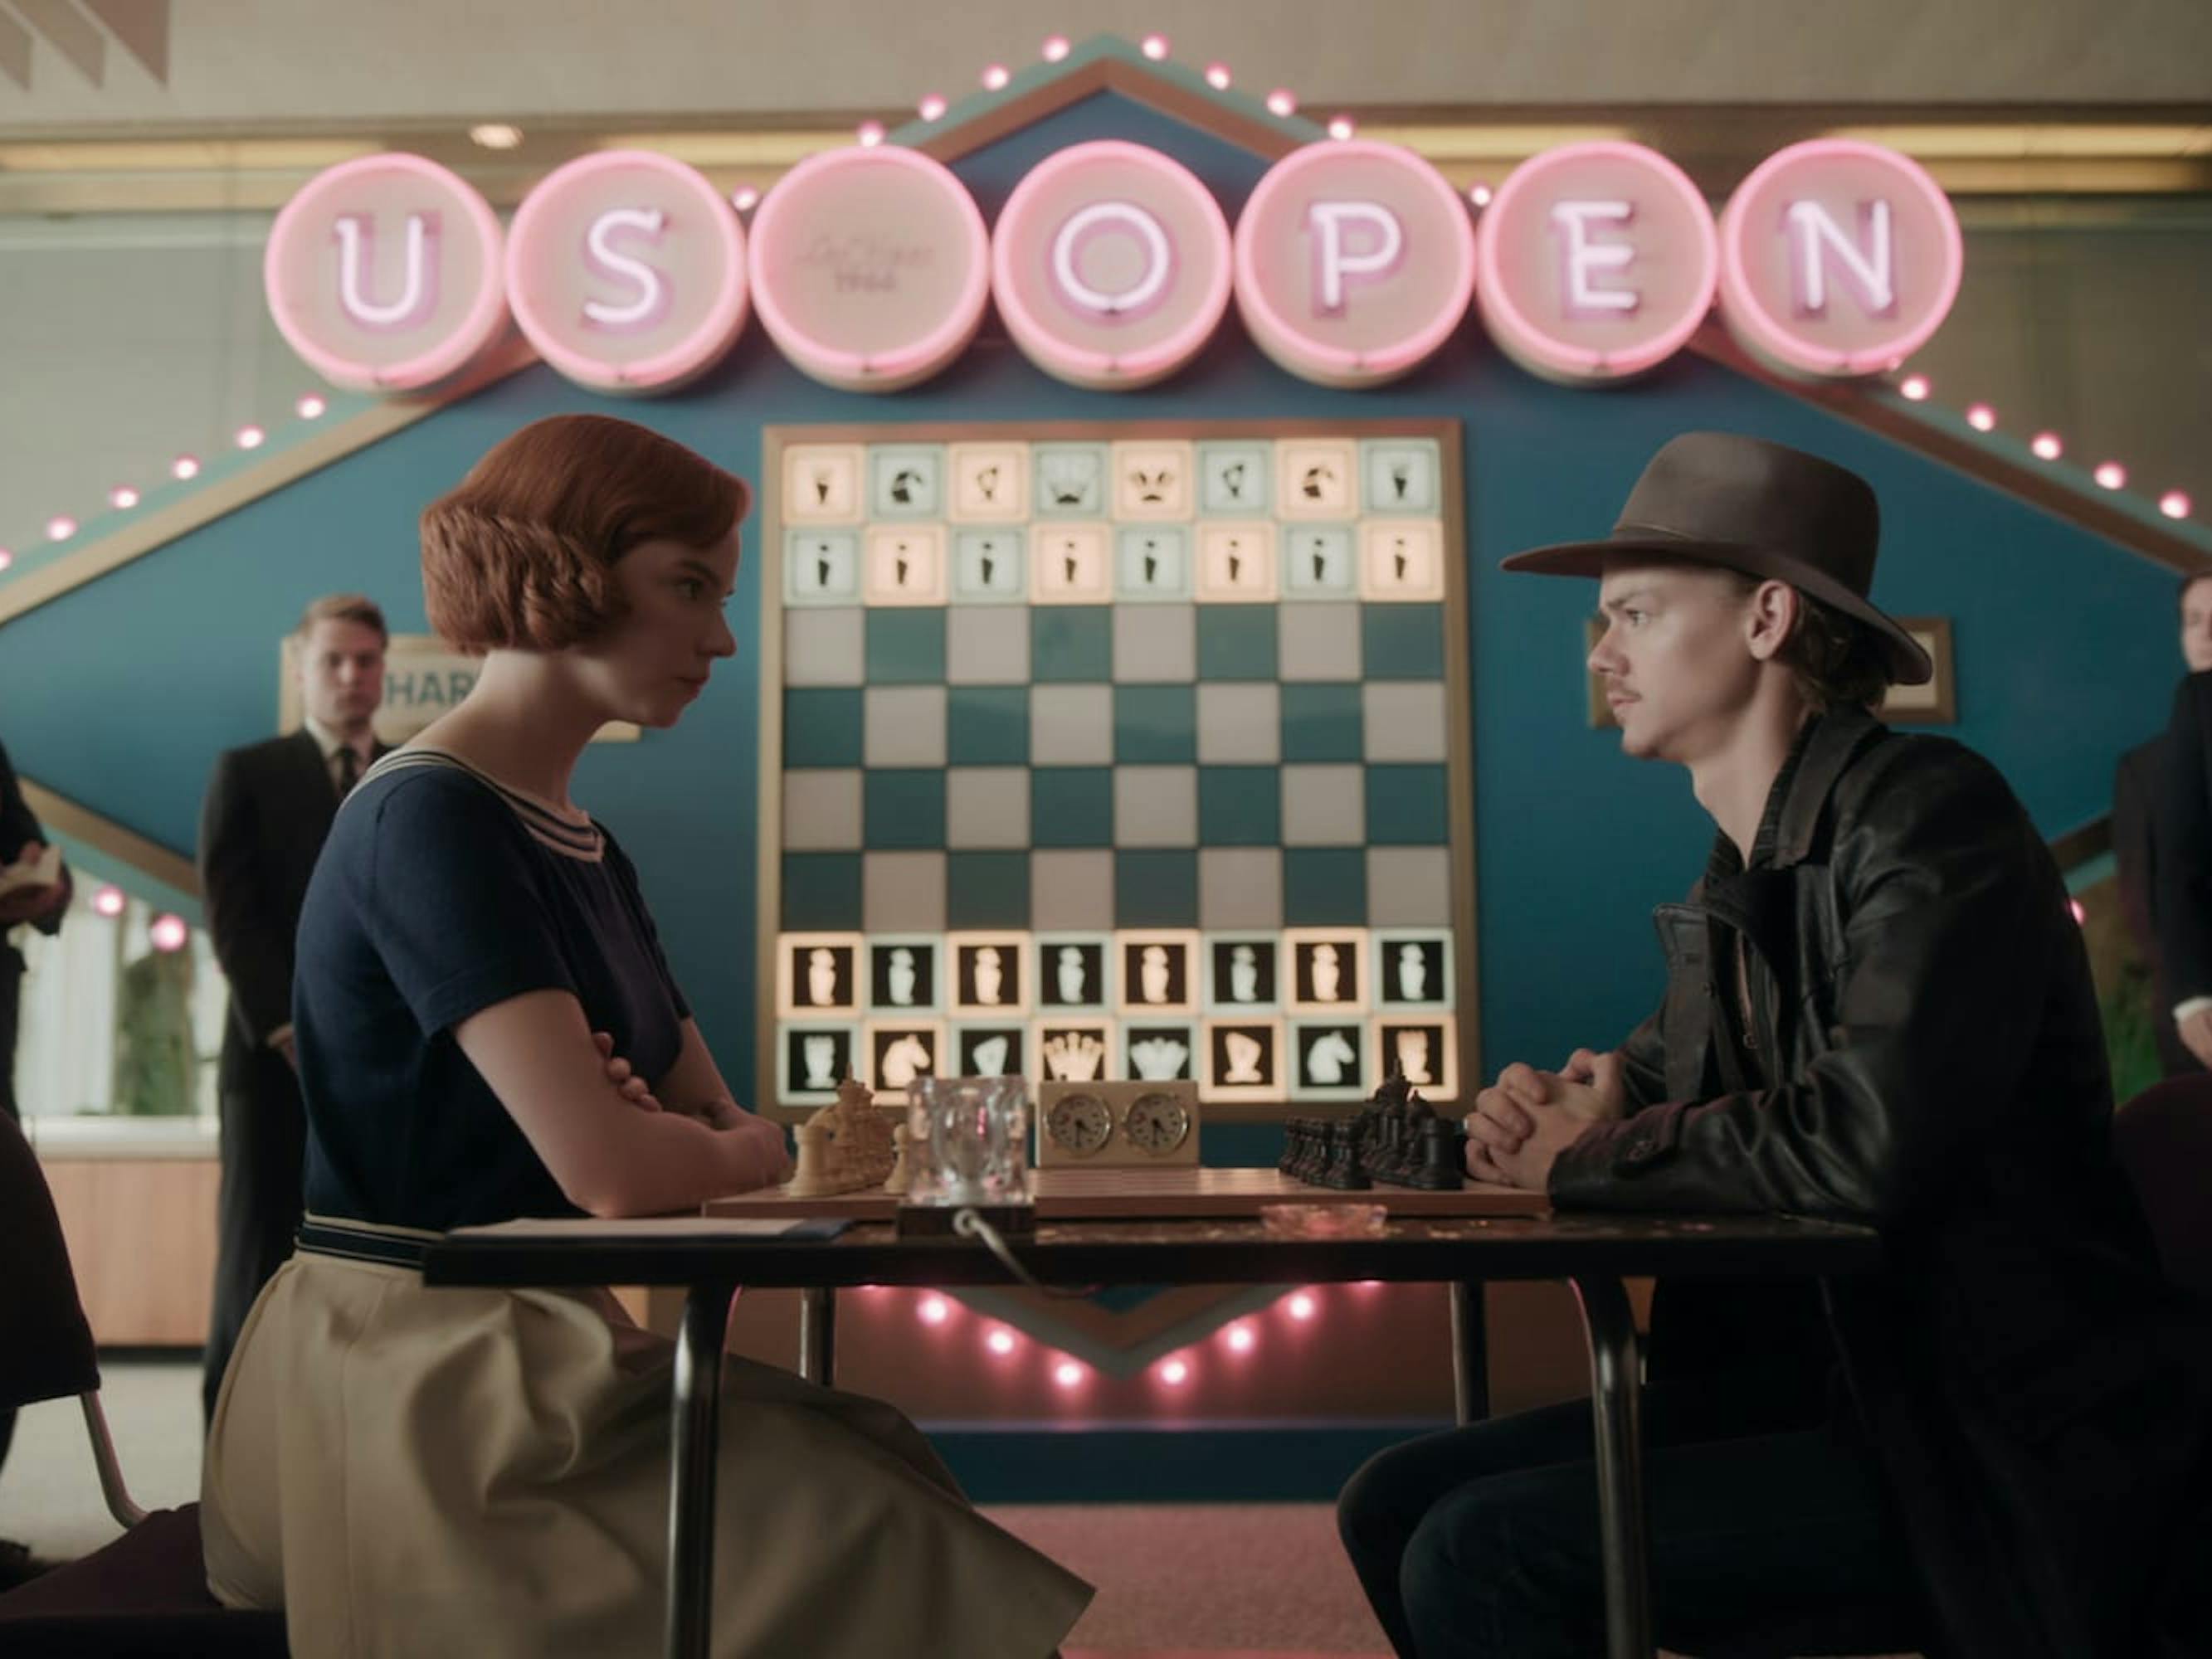 Beth Harmon (Anya Taylor-Joy) and Benny Watts (Thomas Brodie-Sangster) face off in a chess match. Above them reads “US Open” in neon pink light up lettering.